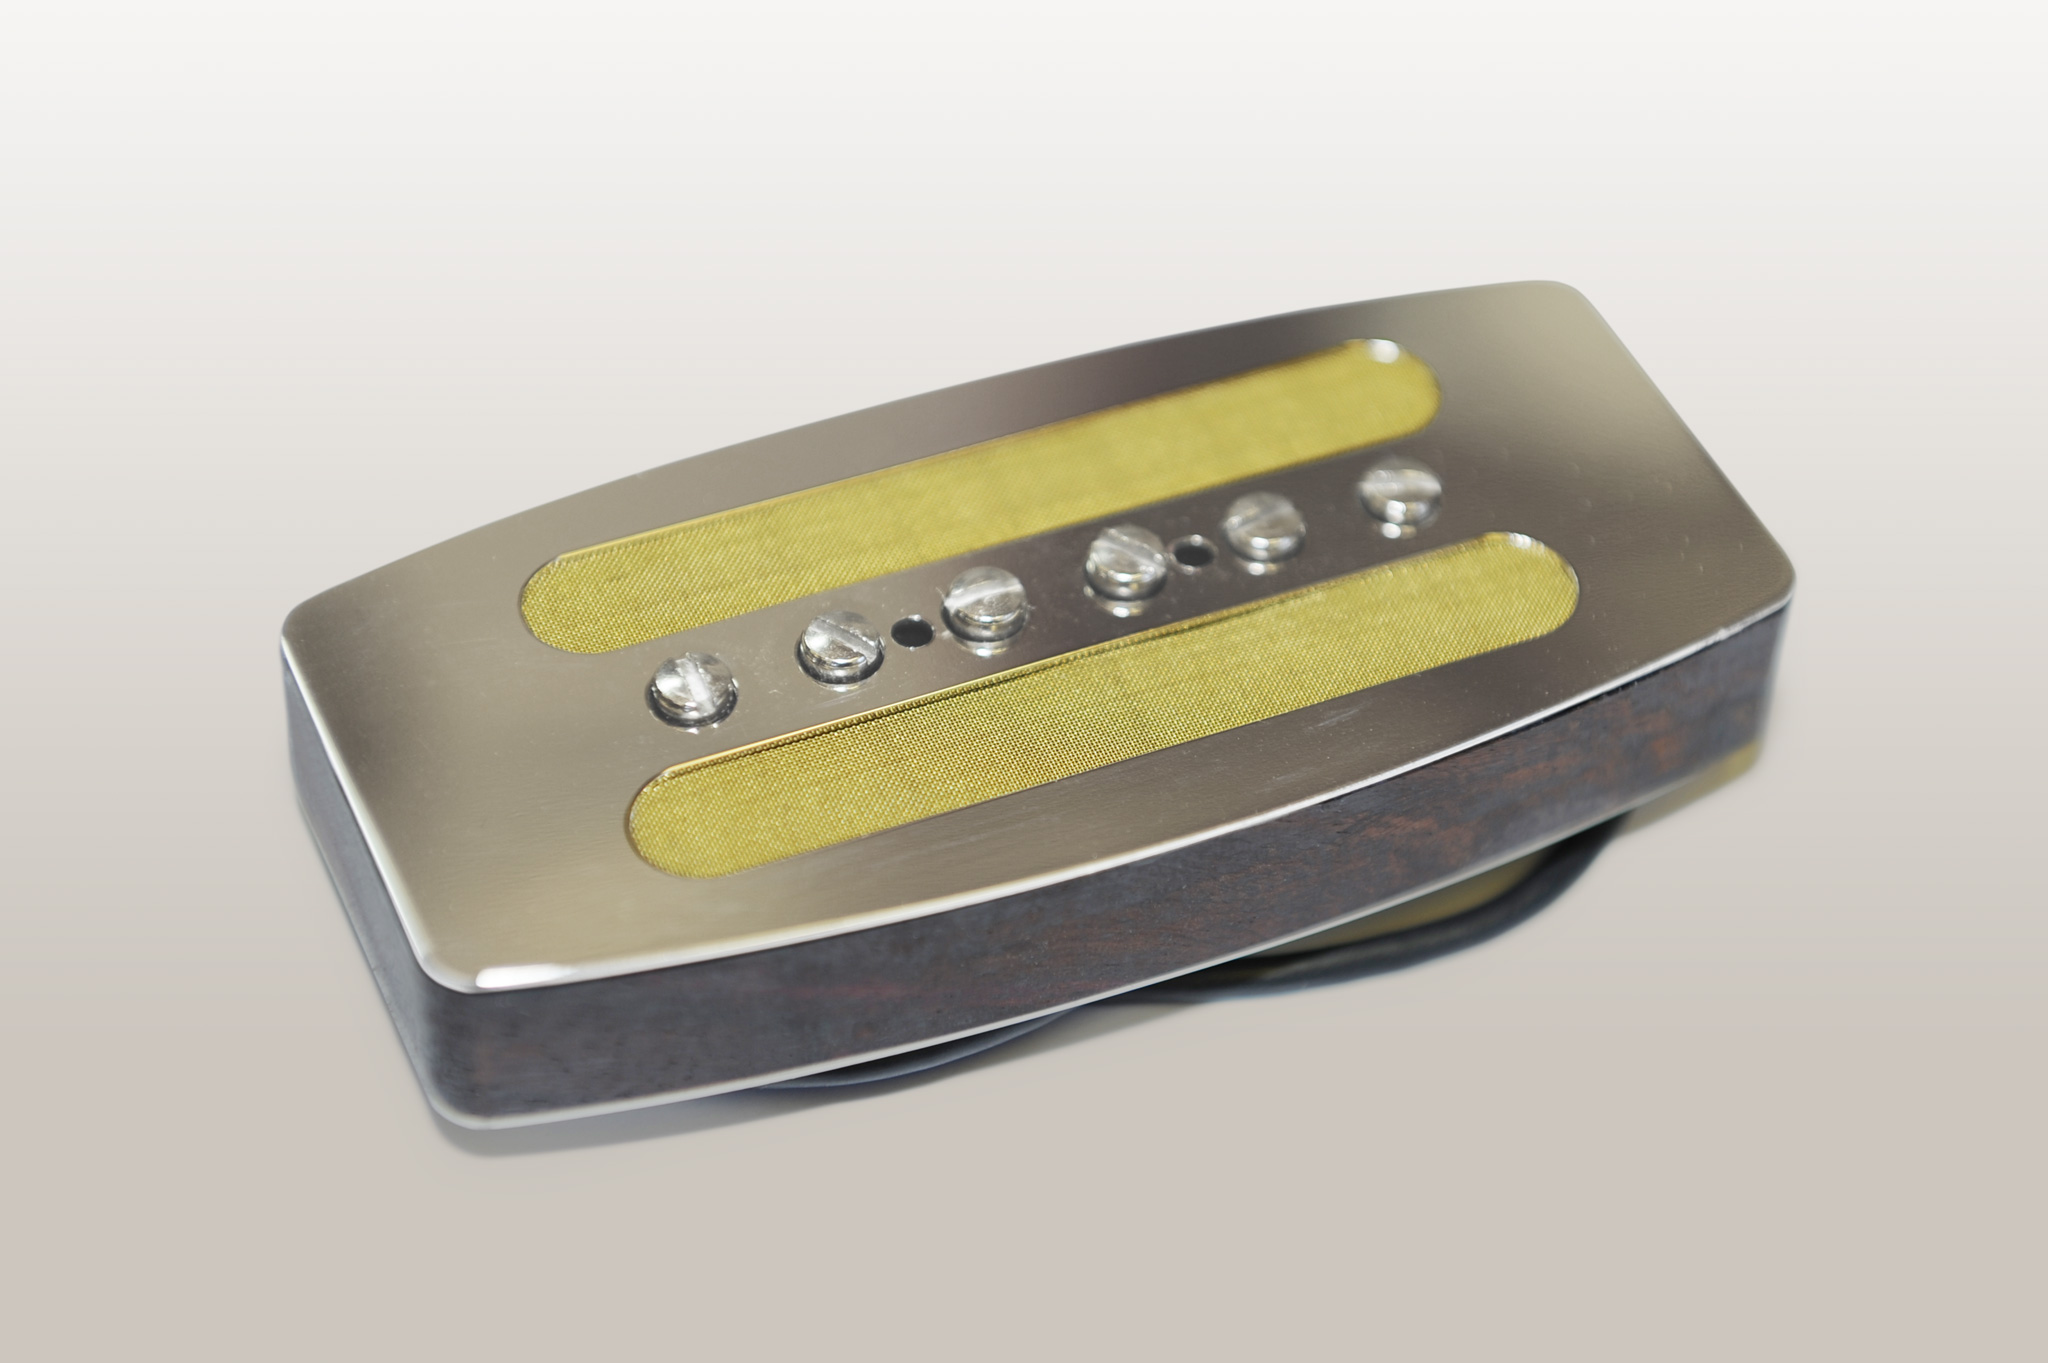 P90 pickup with nickel silver top plate and base plate and ebony frame